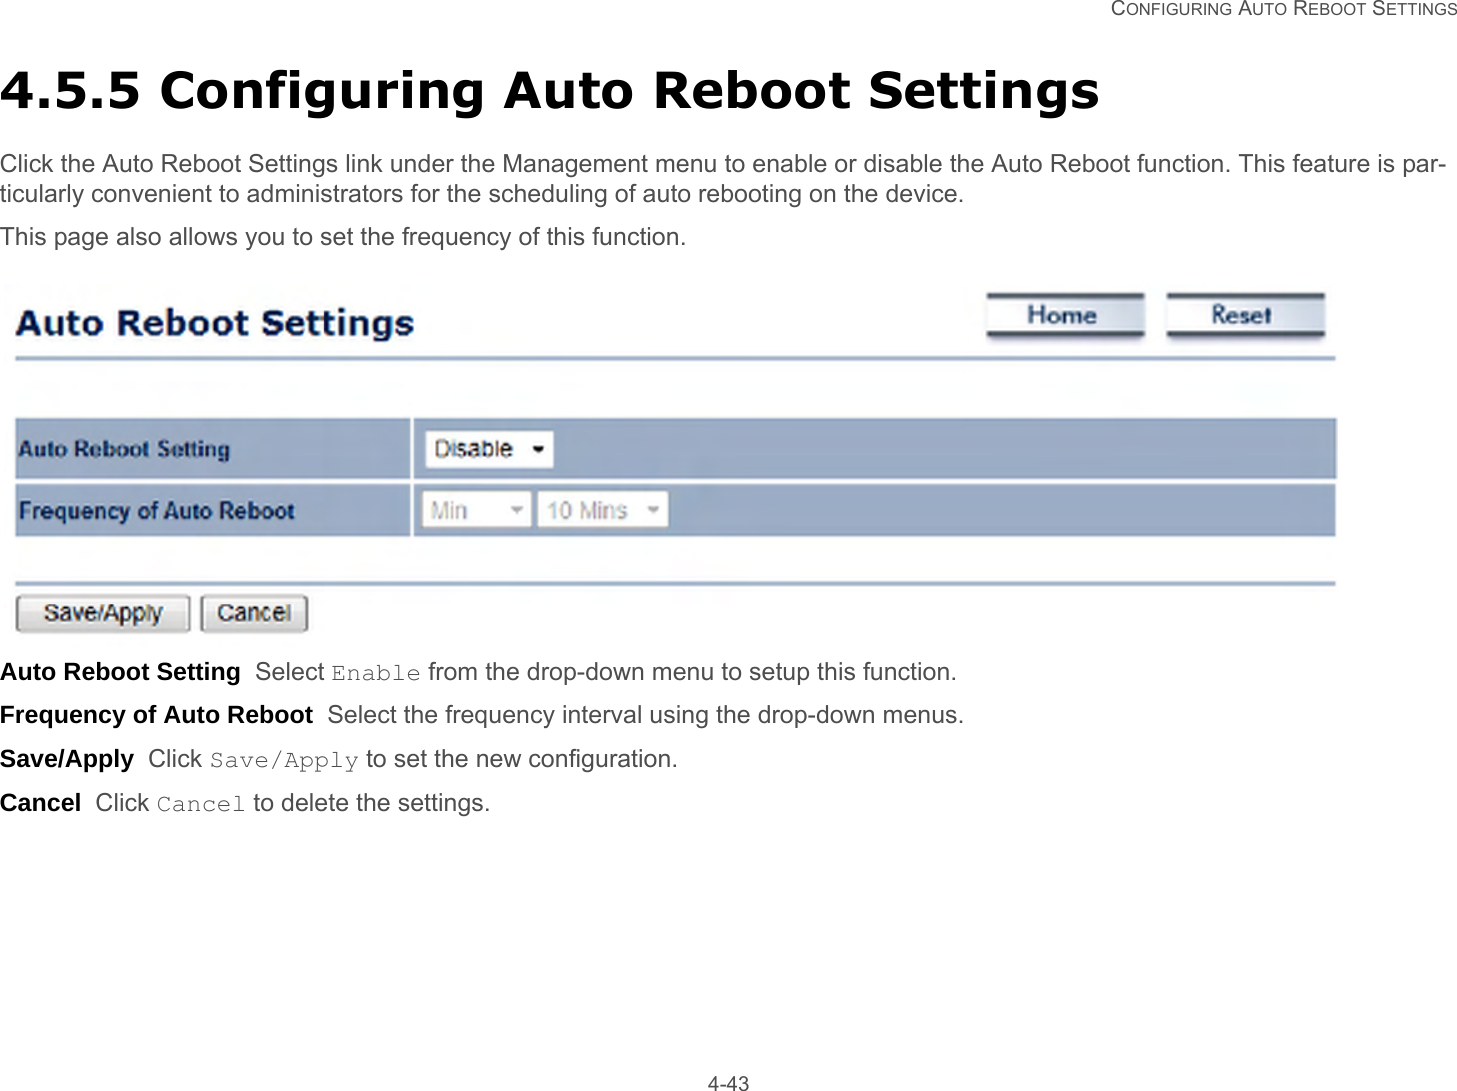   CONFIGURING AUTO REBOOT SETTINGS 4-434.5.5 Configuring Auto Reboot SettingsClick the Auto Reboot Settings link under the Management menu to enable or disable the Auto Reboot function. This feature is par-ticularly convenient to administrators for the scheduling of auto rebooting on the device.This page also allows you to set the frequency of this function.Auto Reboot Setting  Select Enable from the drop-down menu to setup this function.Frequency of Auto Reboot  Select the frequency interval using the drop-down menus.Save/Apply  Click Save/Apply to set the new configuration.Cancel  Click Cancel to delete the settings.